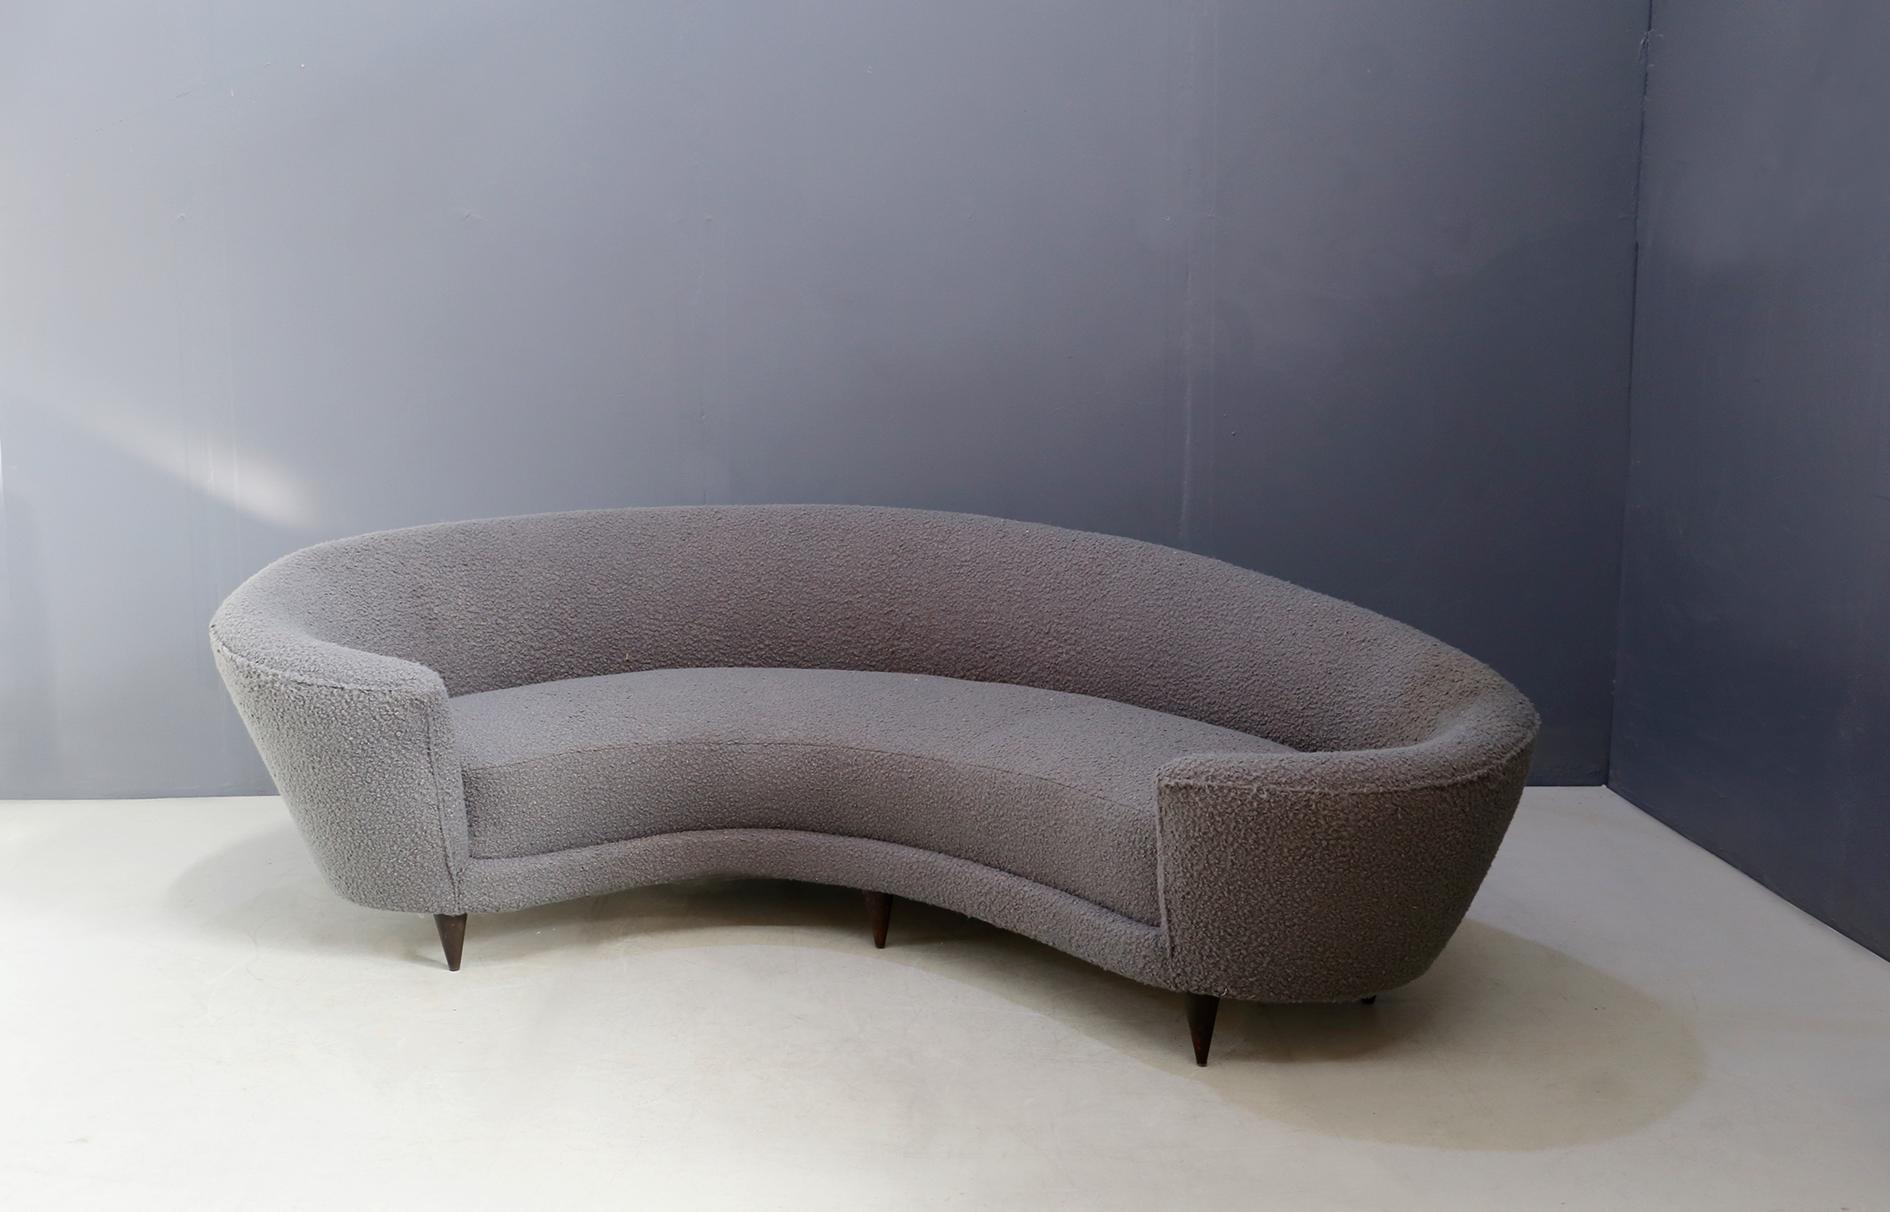 Curva sofa by Federico Munari in grey bouclè fabric, 1950s. The sofa has original springs and structure. The sofa is lined with grey bouclè fabric. The sofa is called Curva because of its curved shape. Its feet are made of wood with conical shape.